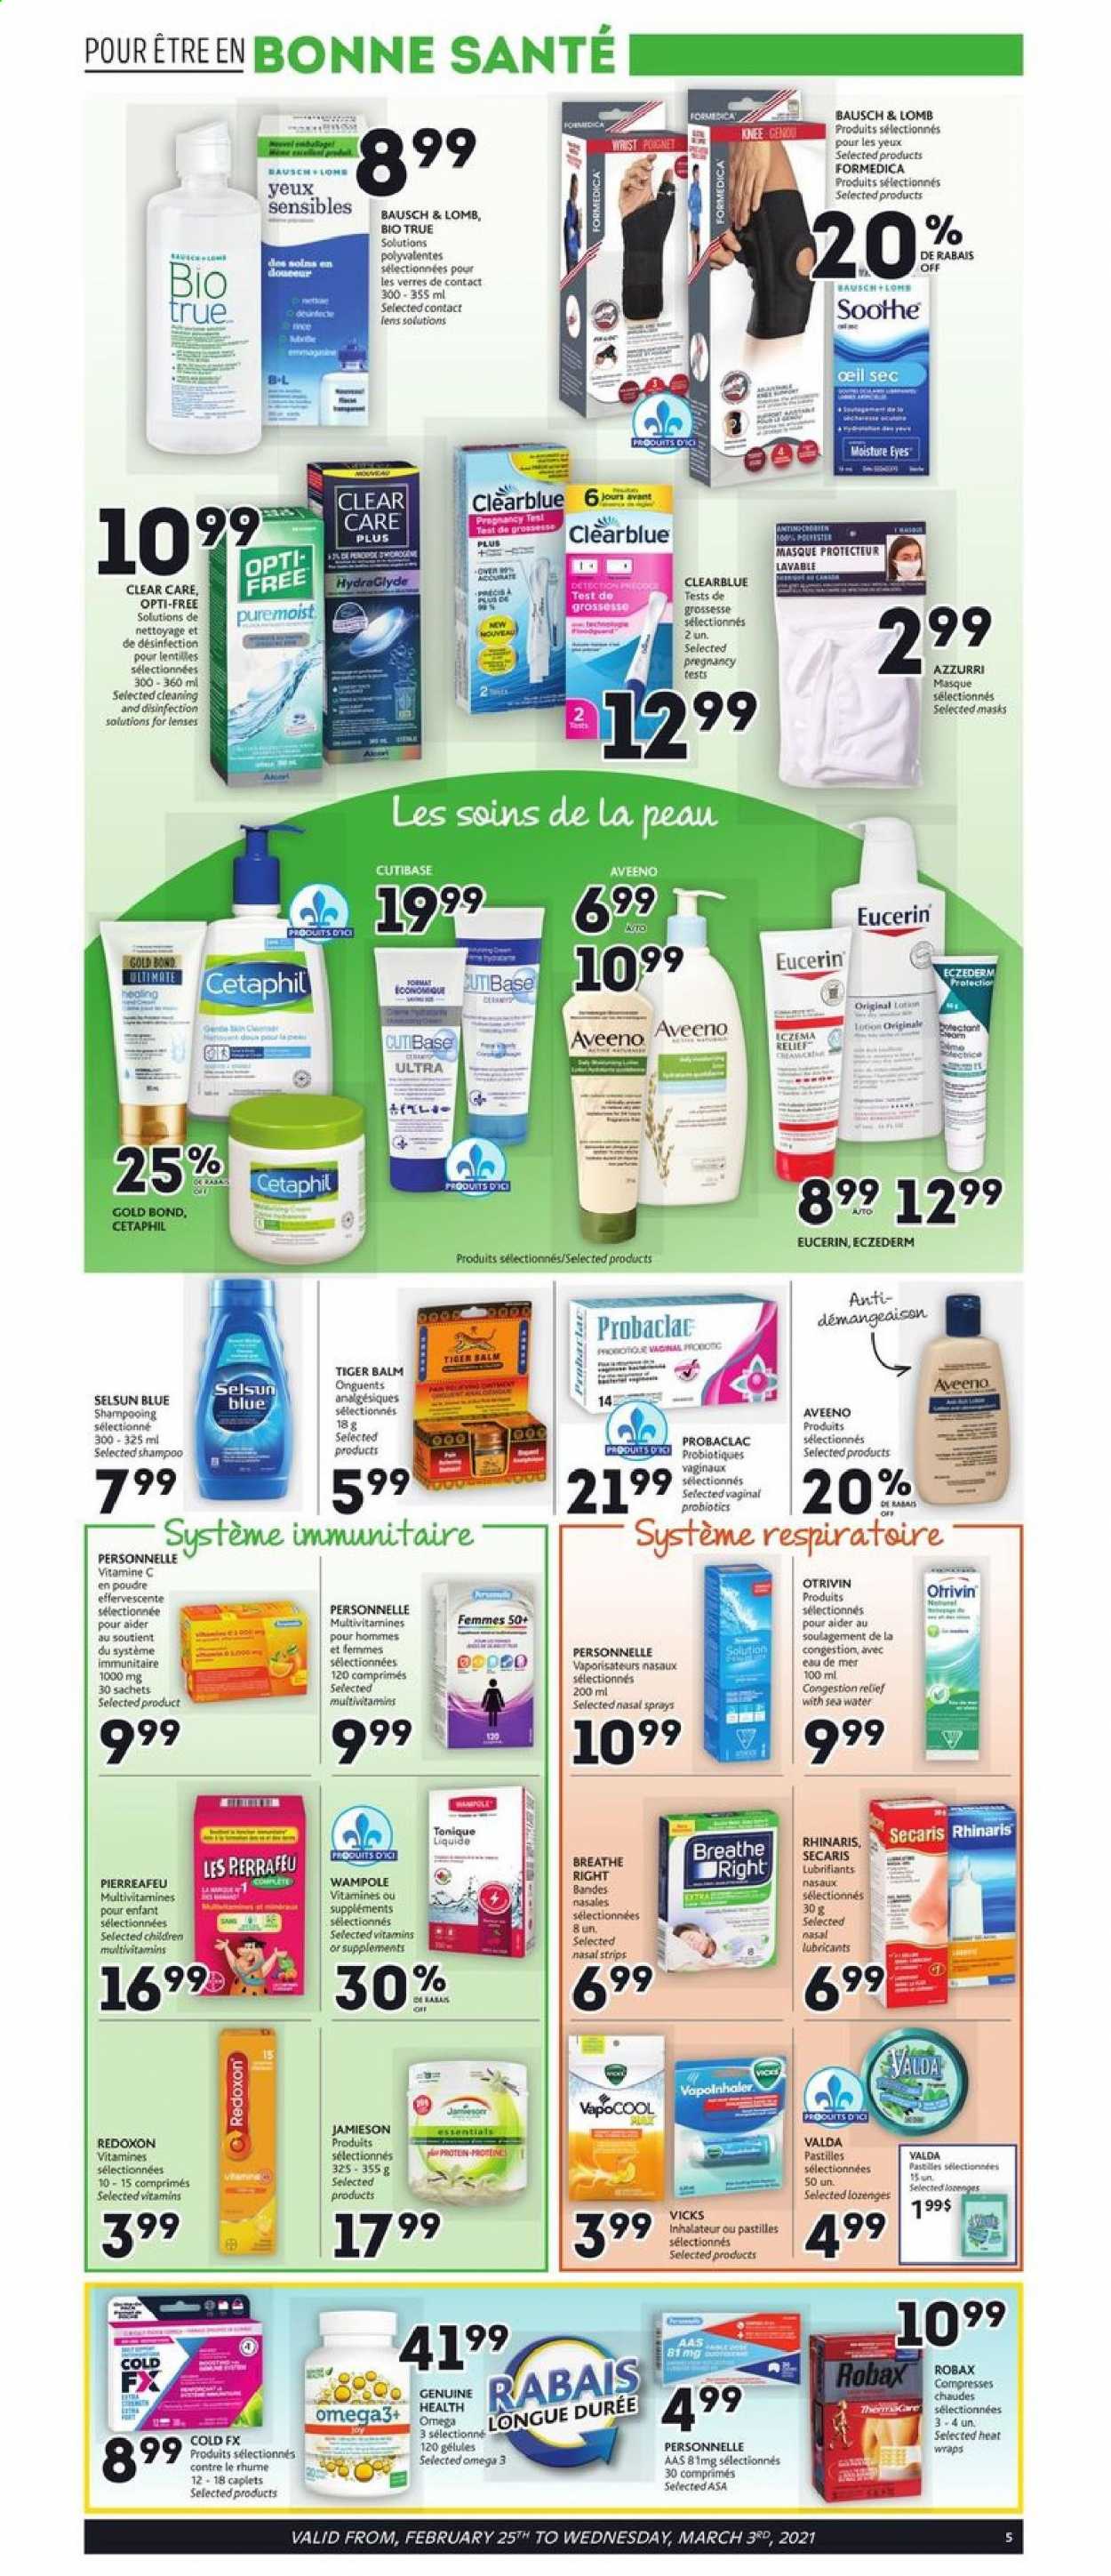 thumbnail - Brunet Flyer - February 25, 2021 - March 03, 2021 - Sales products - Aveeno, Mum, Vicks, Clear Care, multivitamin, probiotics, Omega-3, Biotrue, lenses, Eucerin, desinfection. Page 3.